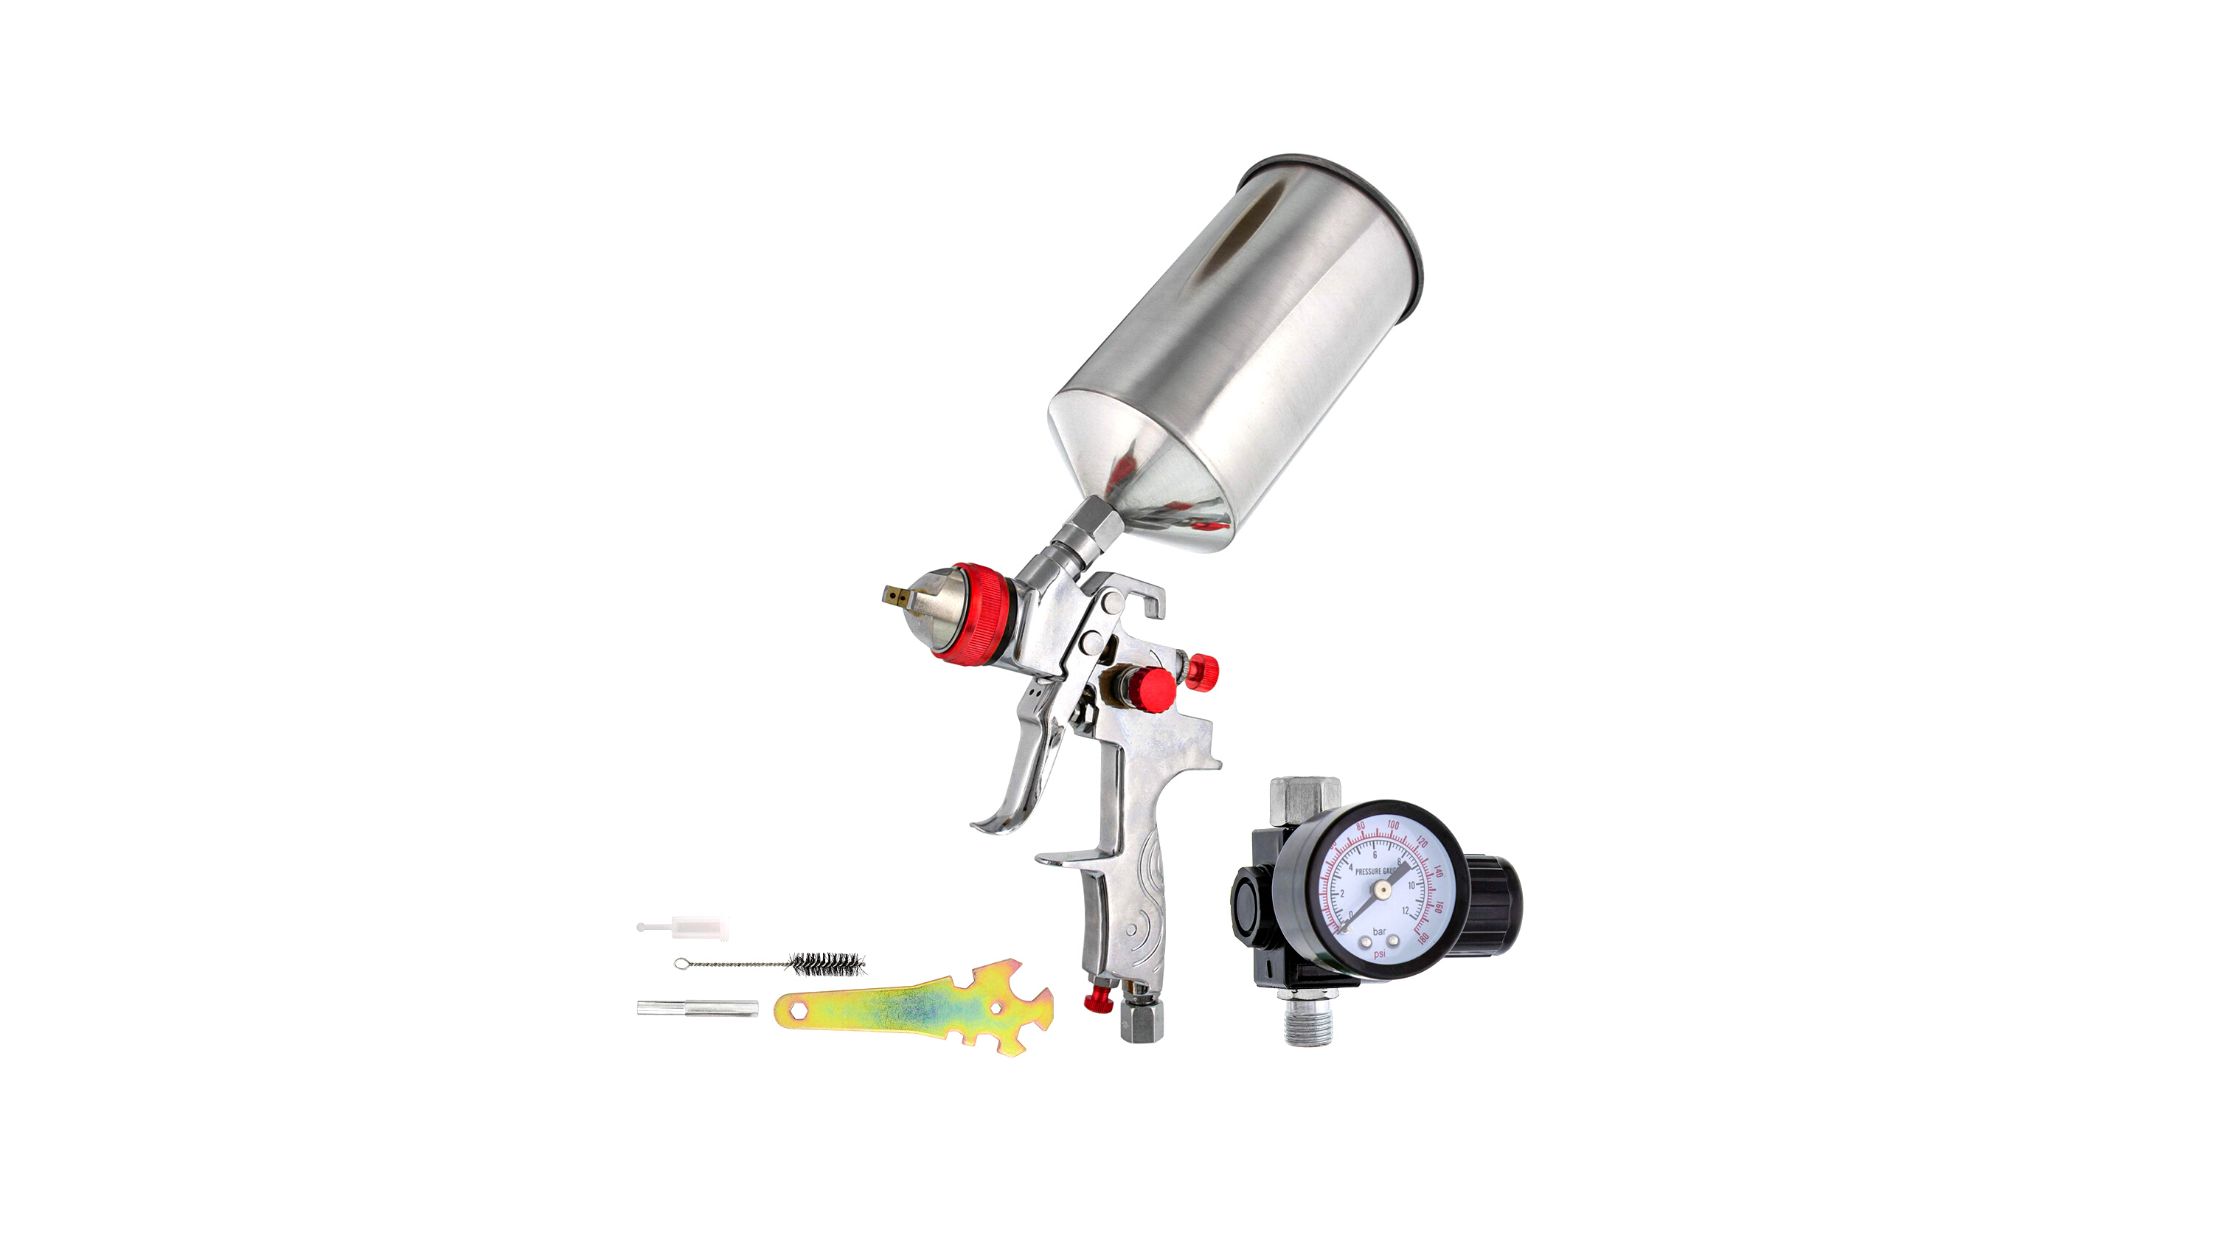 The TCP GLOBAL Professional Gravity Feed HVLP SPRAY Gun With A 1.4mm Fluid Tip